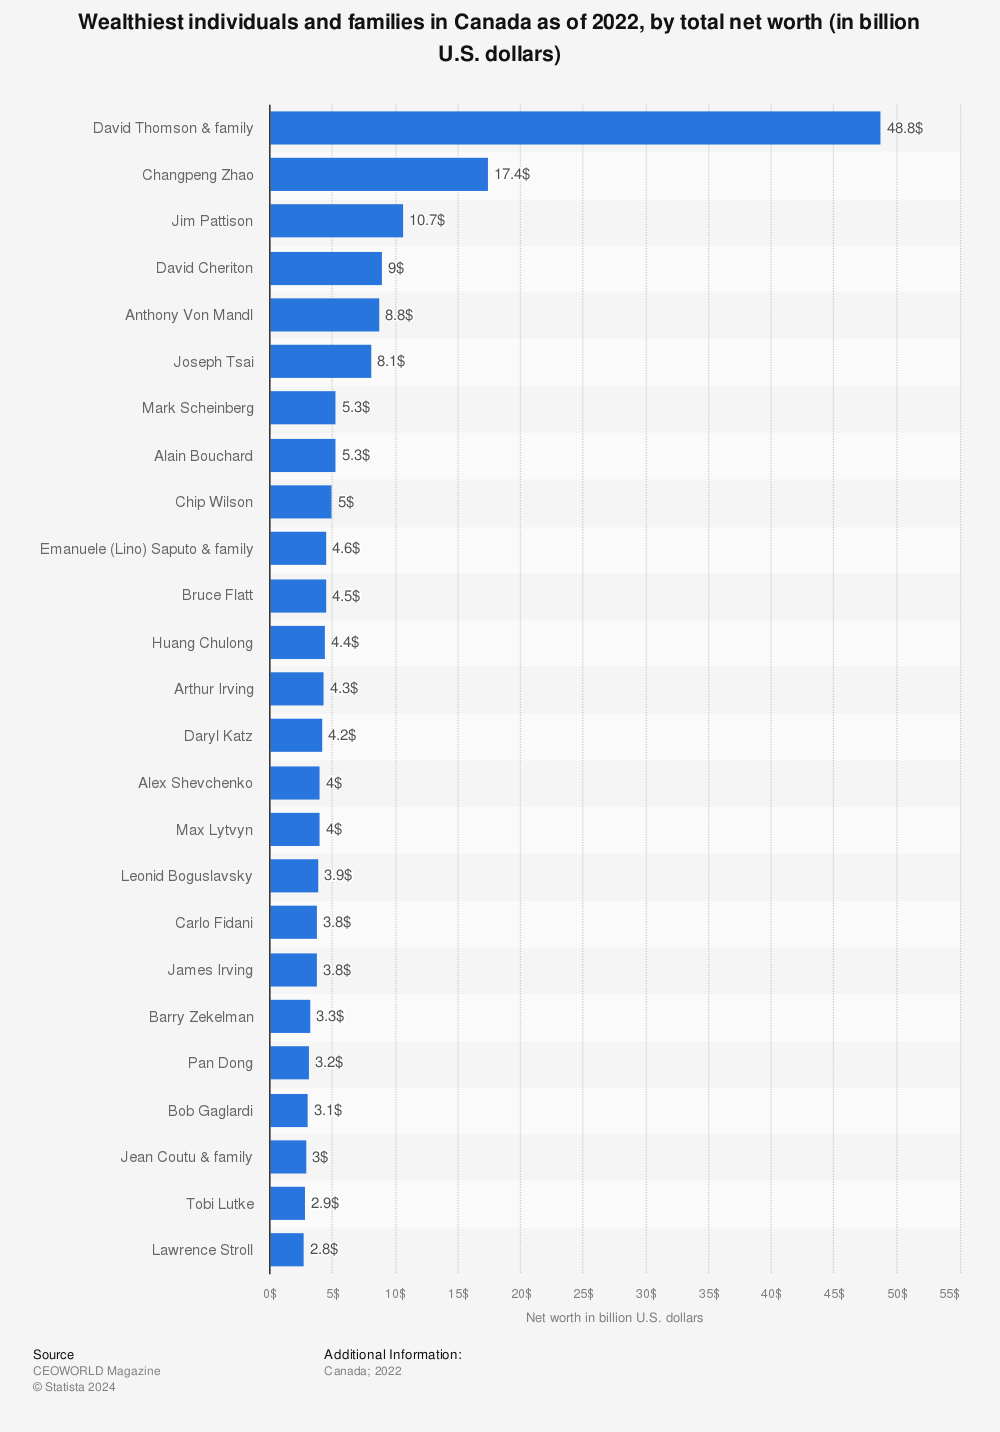 Statistic: Wealthiest individuals and families in Canada as of 2022, by total net worth (in billion U.S. dollars) | Statista